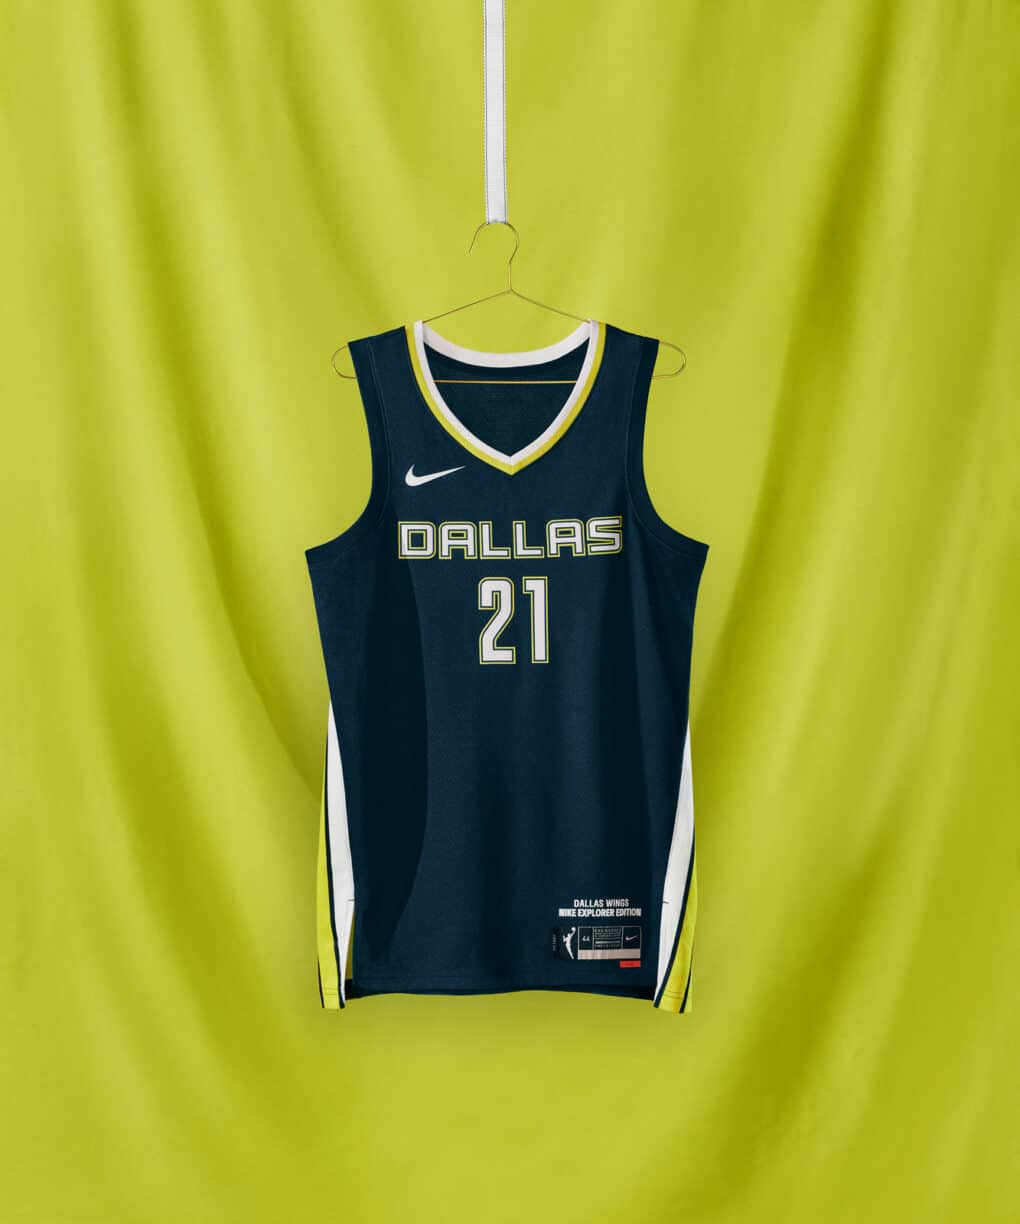 Nike Introduce the WNBA's 2021 Uniform Editions and Apparel 